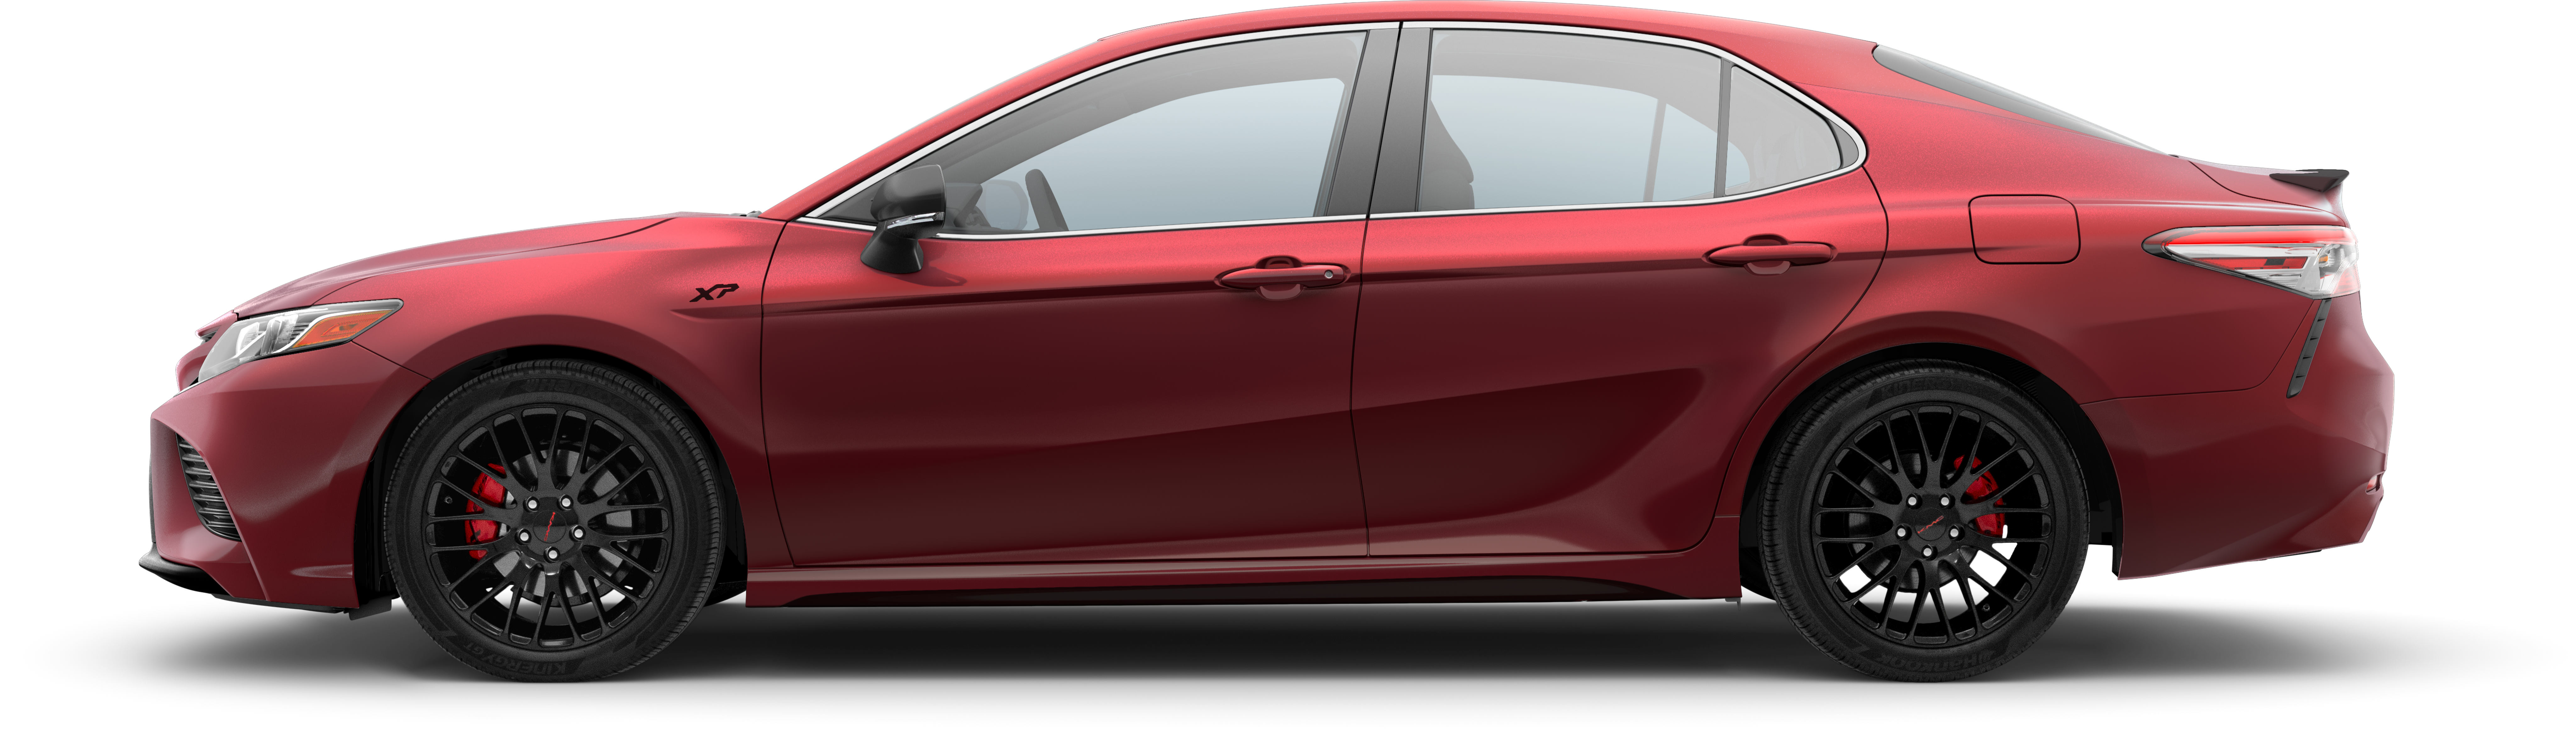 exterior shot of a ruby red Toyota Camry XP Series